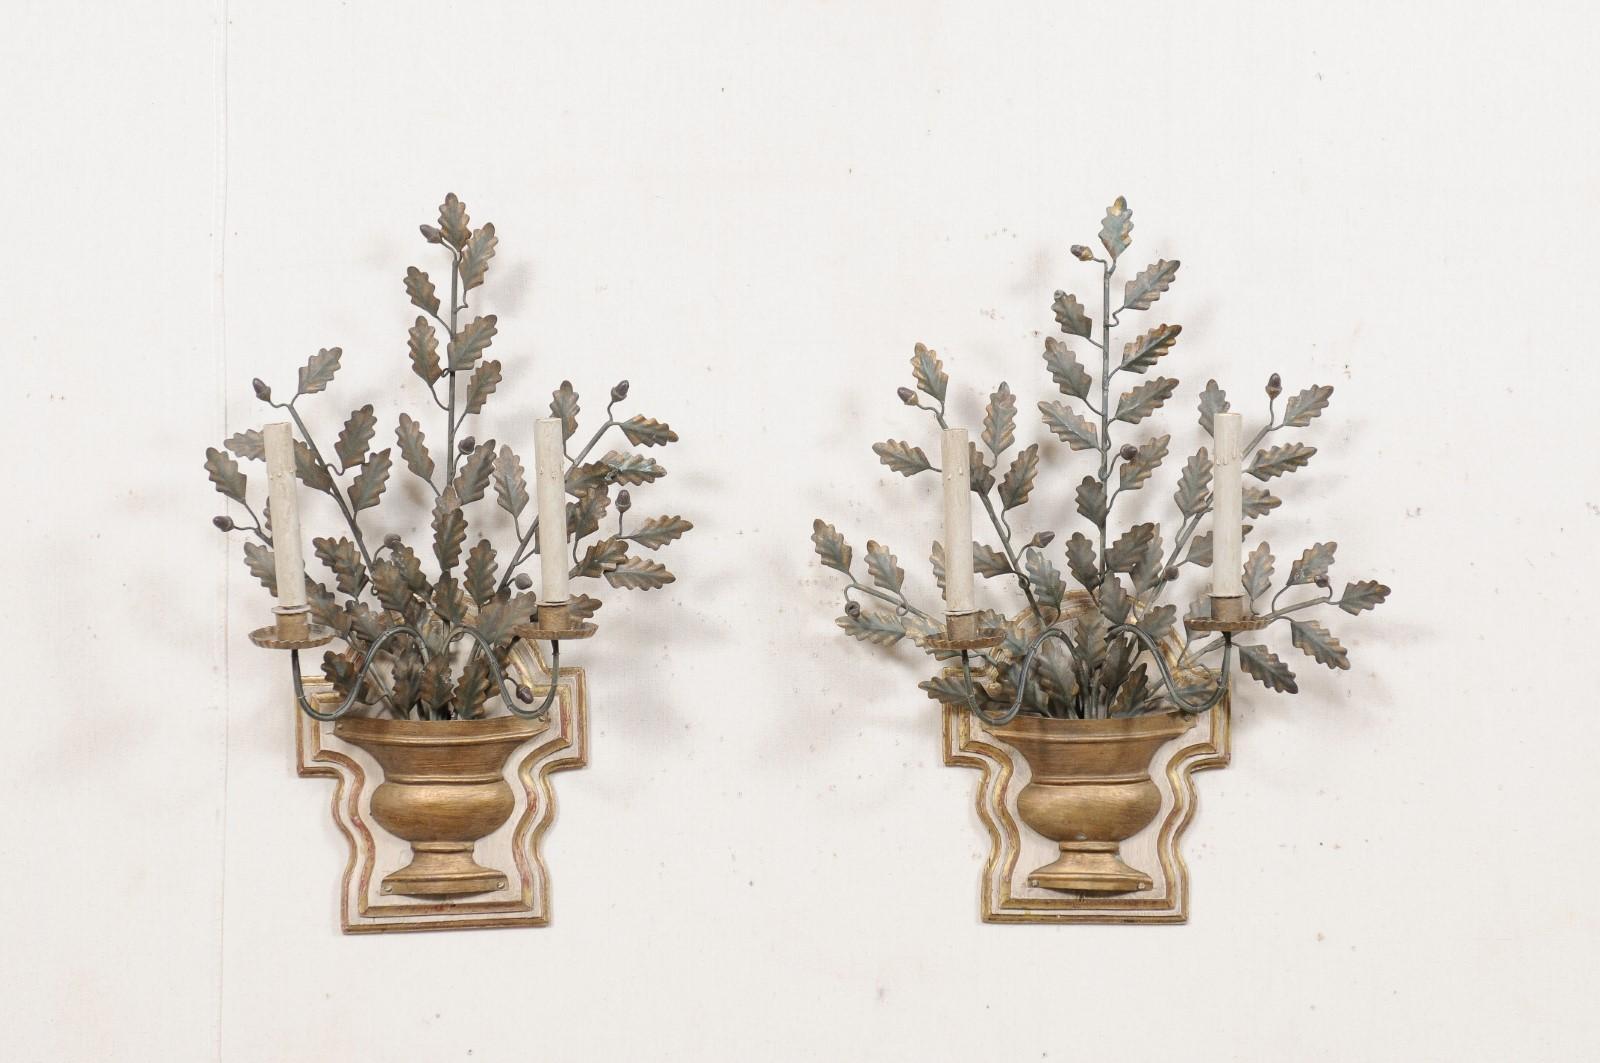 A pair of Italian two-light metal and carved wood candle sconces. This vintage pair of decorative wall sconces from Italy feature urn-shaped carved wood wall plaques as backplates, from which a metal arm swoops outward and in separation presents a